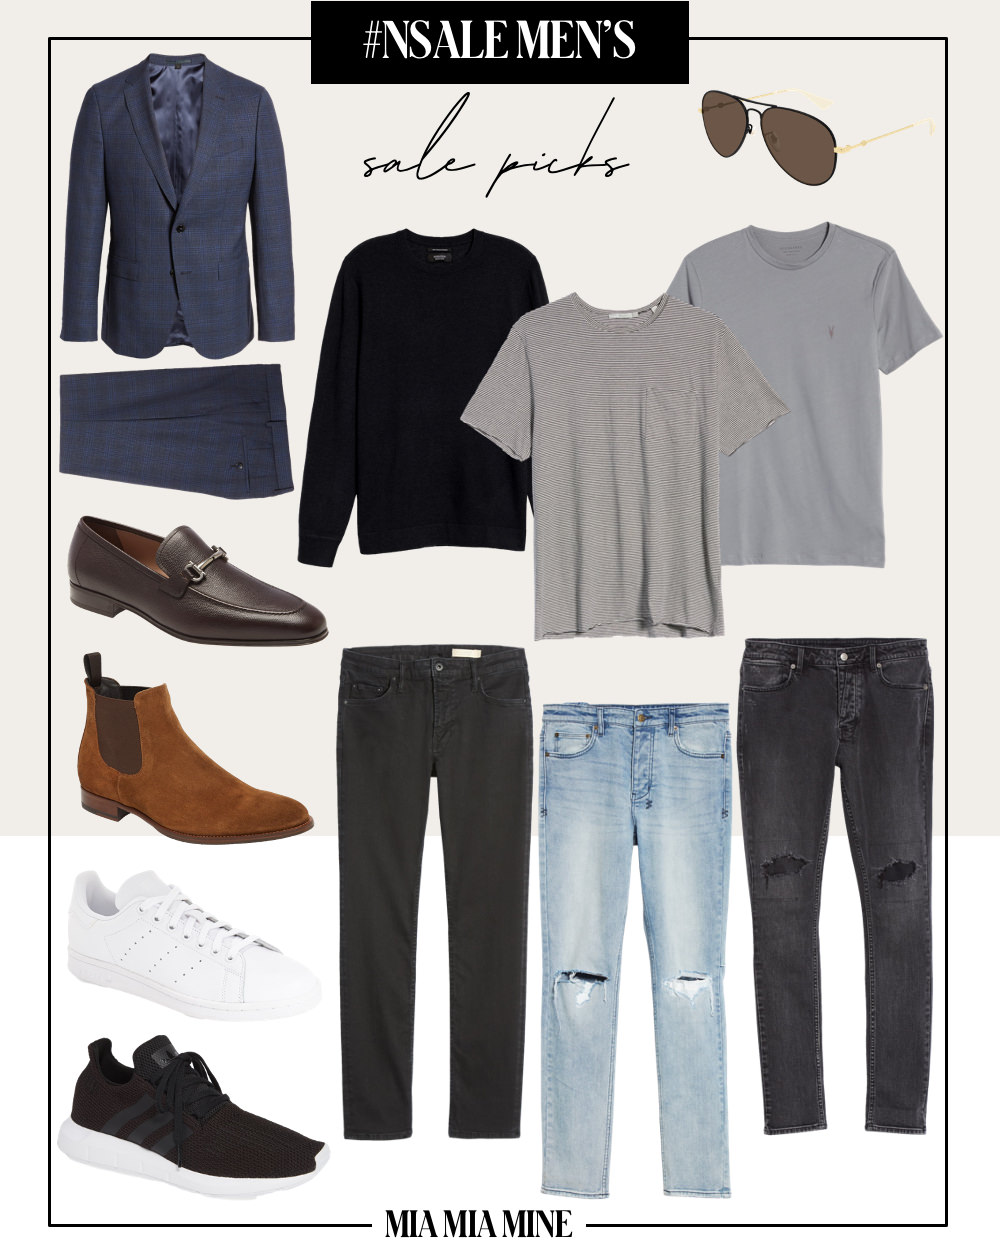 nordstrom anniversary sale men's outfit ideas